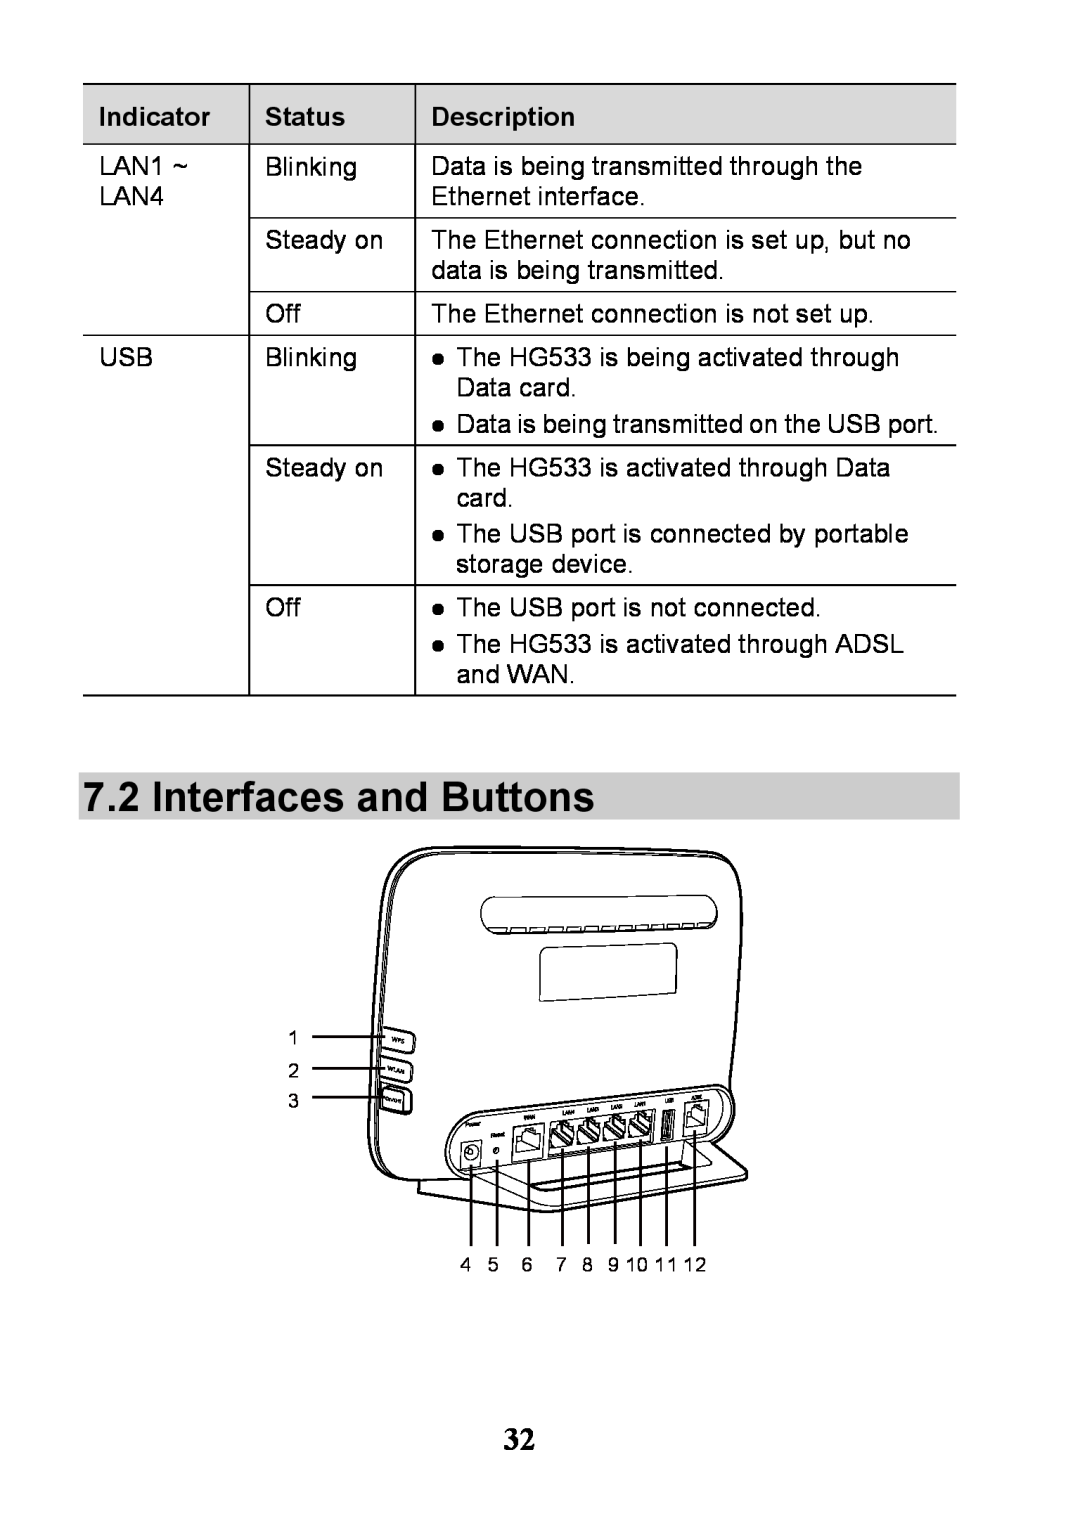 Huawei V100R001 manual Interfaces and Buttons,  Data is being transmitted on the USB port 